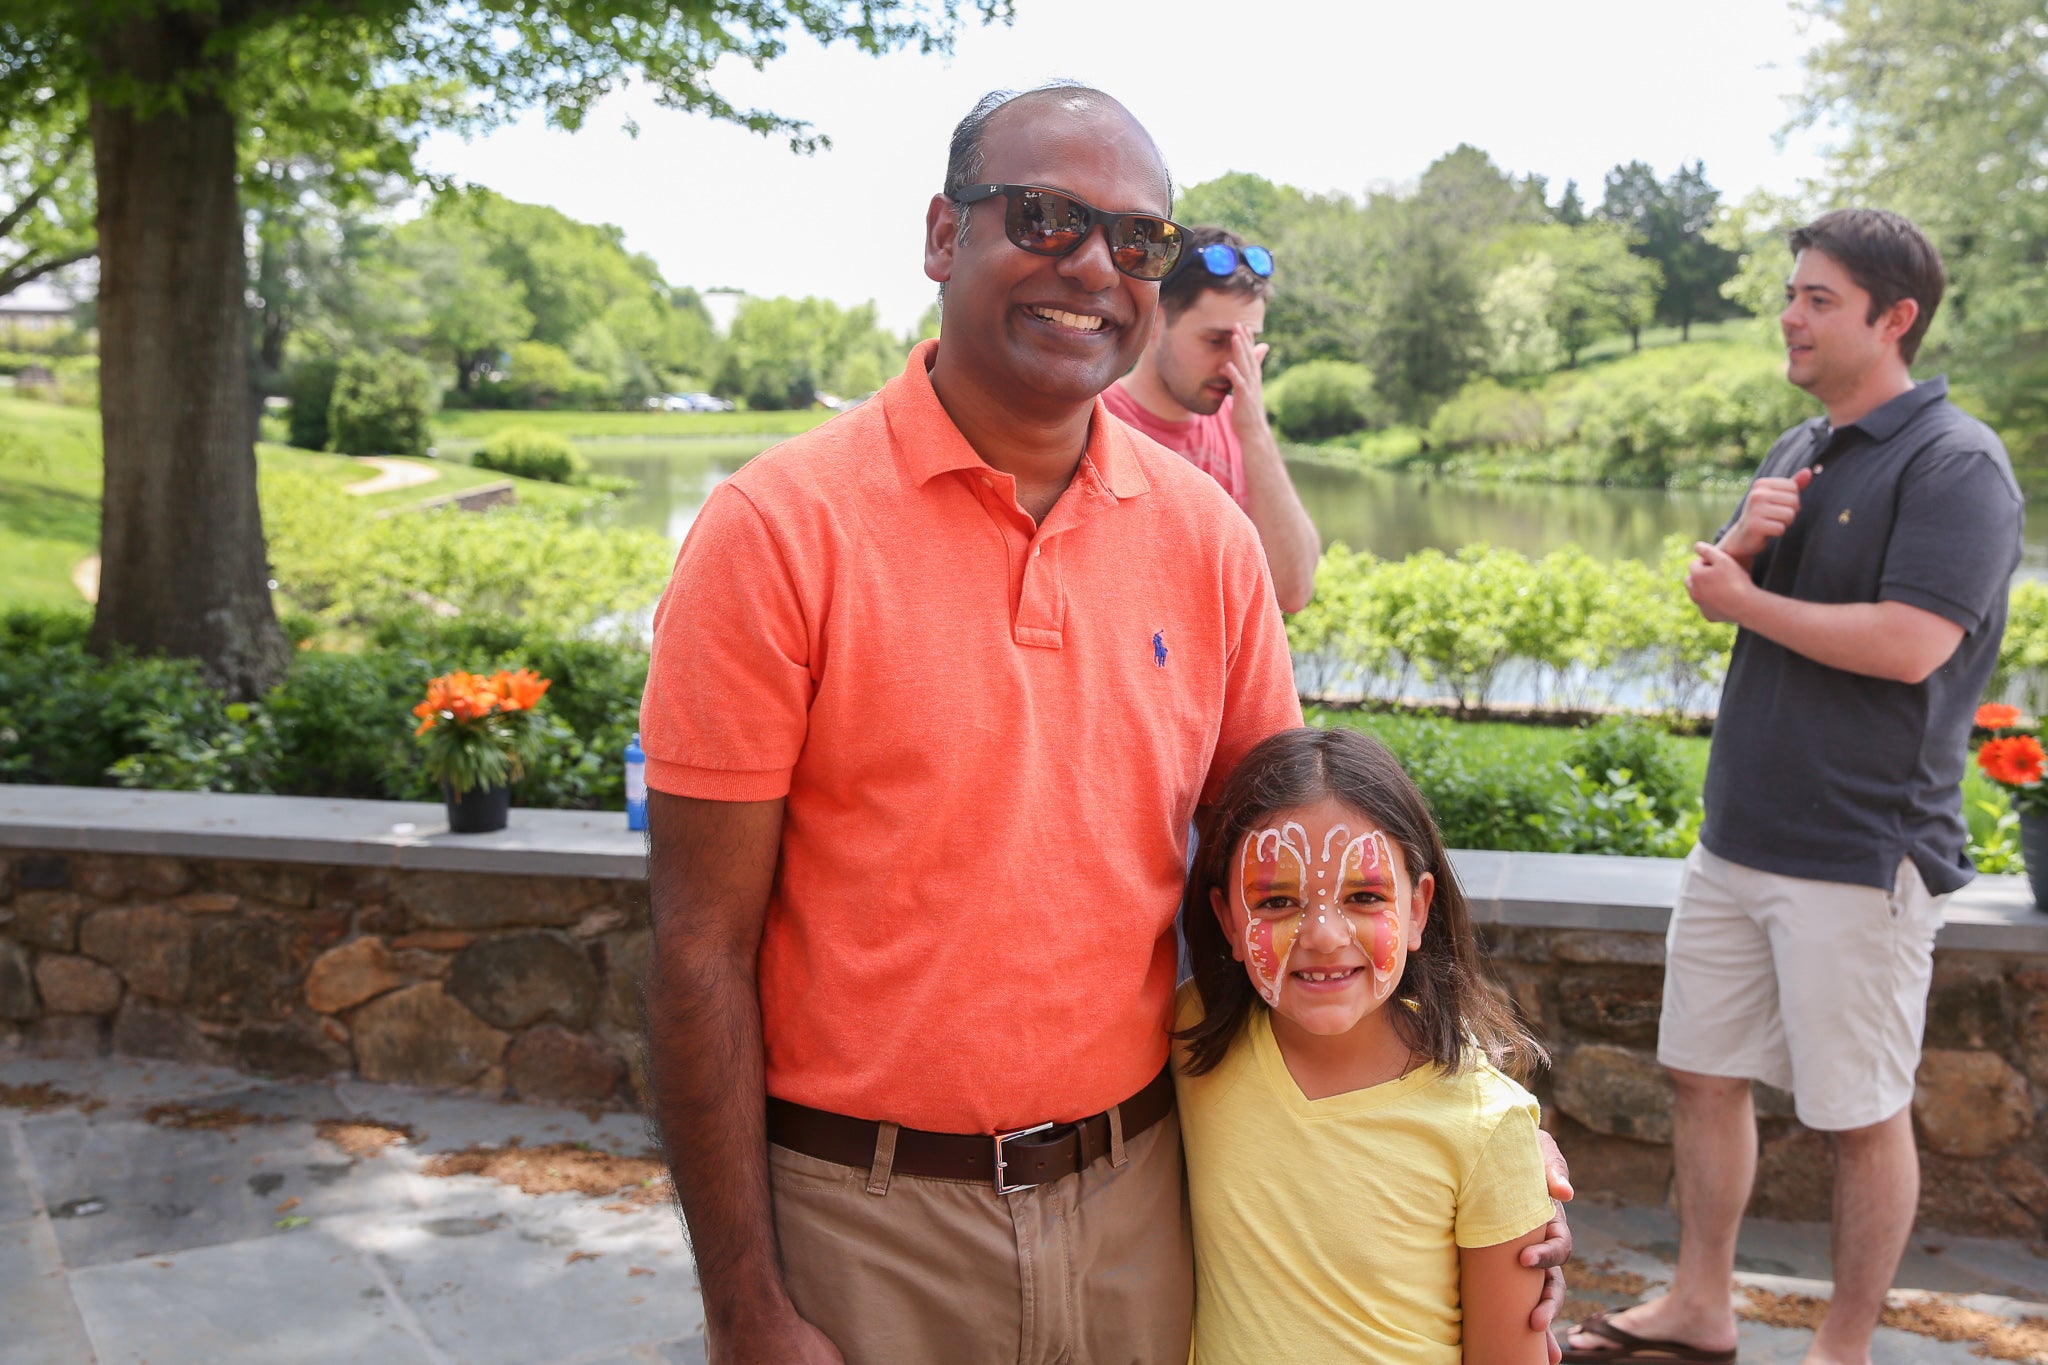 uva radiology picnic with families